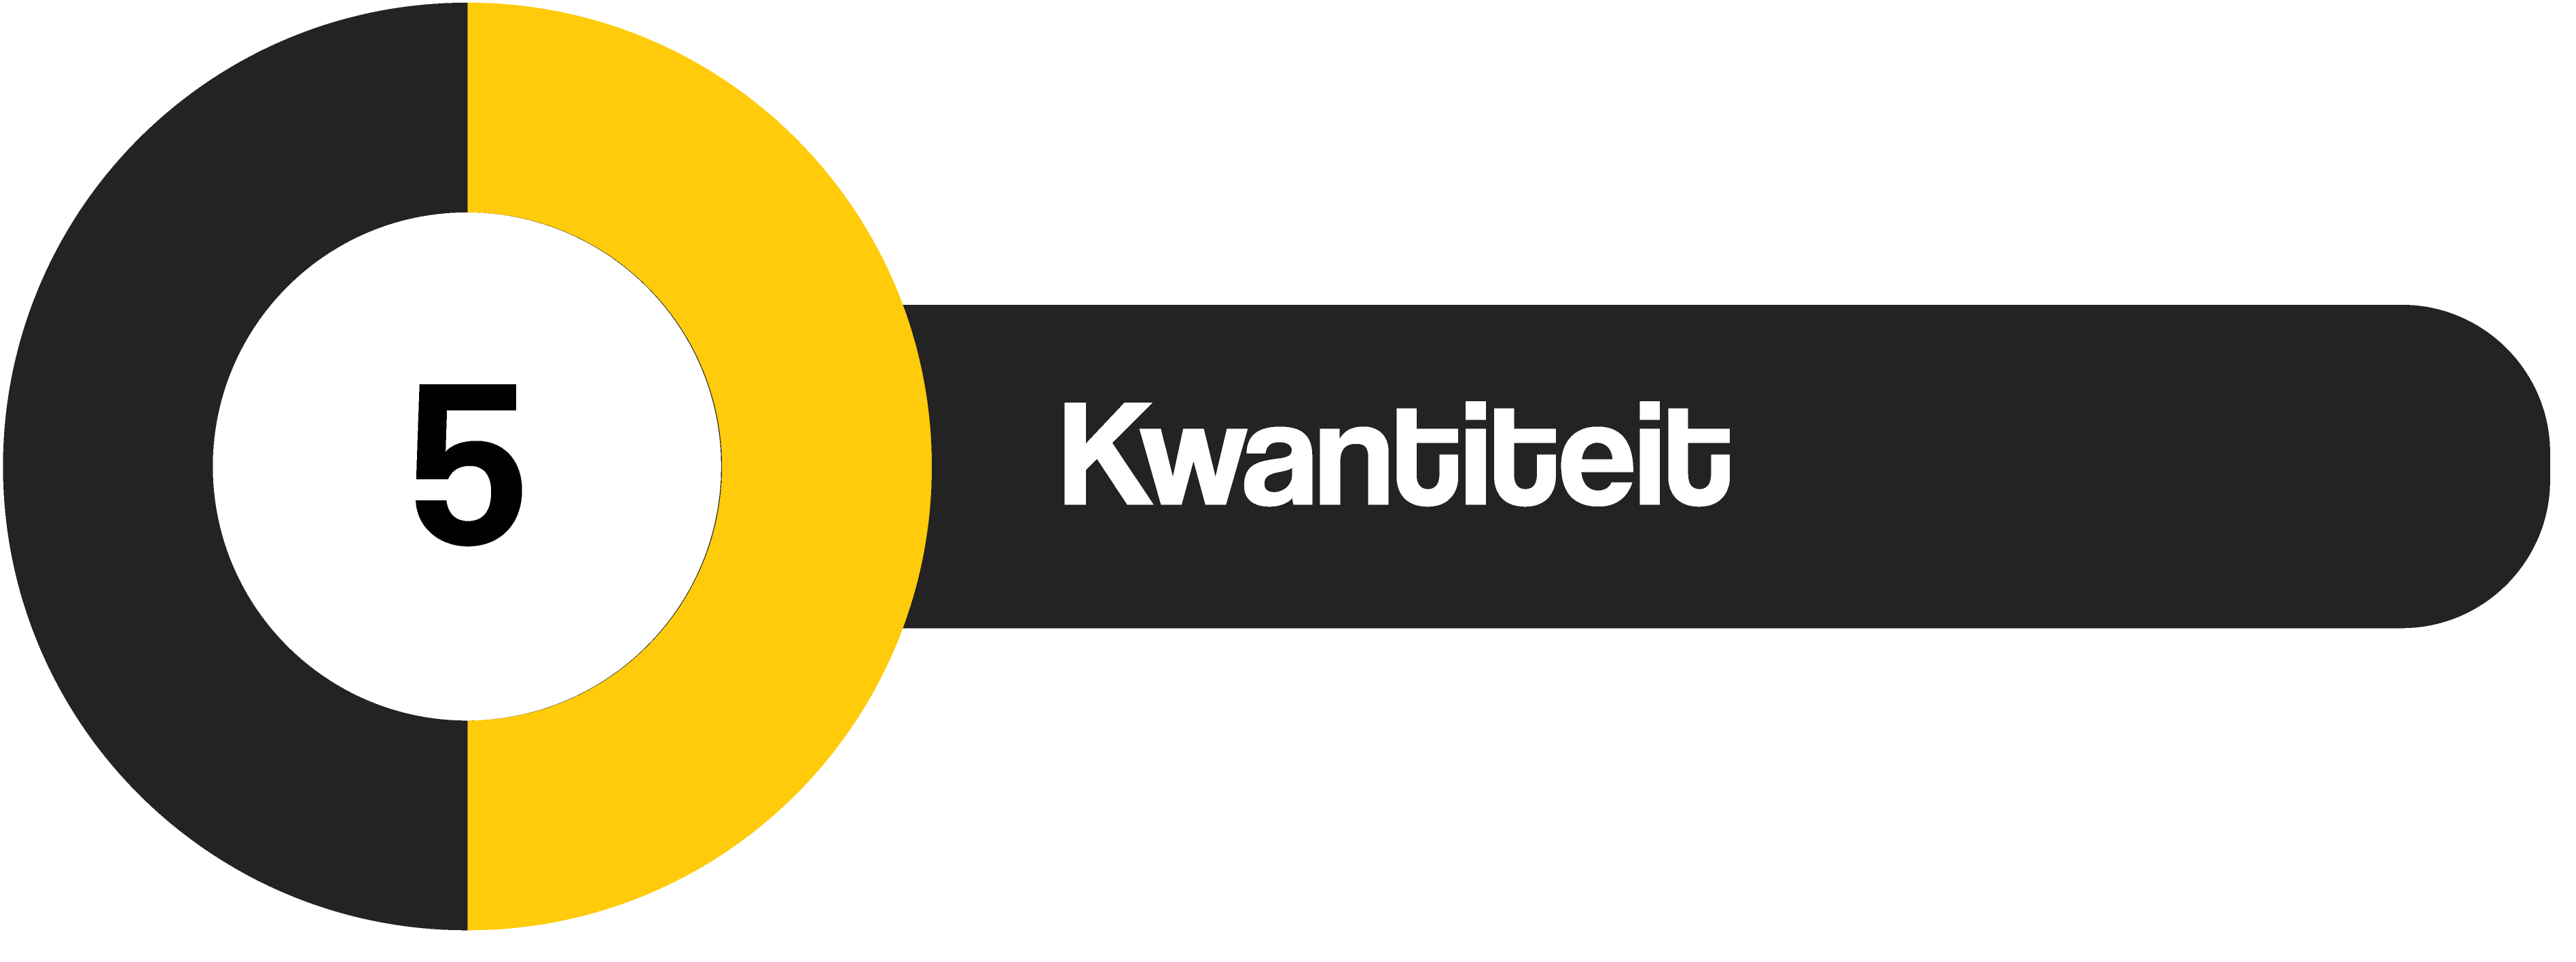 Review Kwantiteit 5